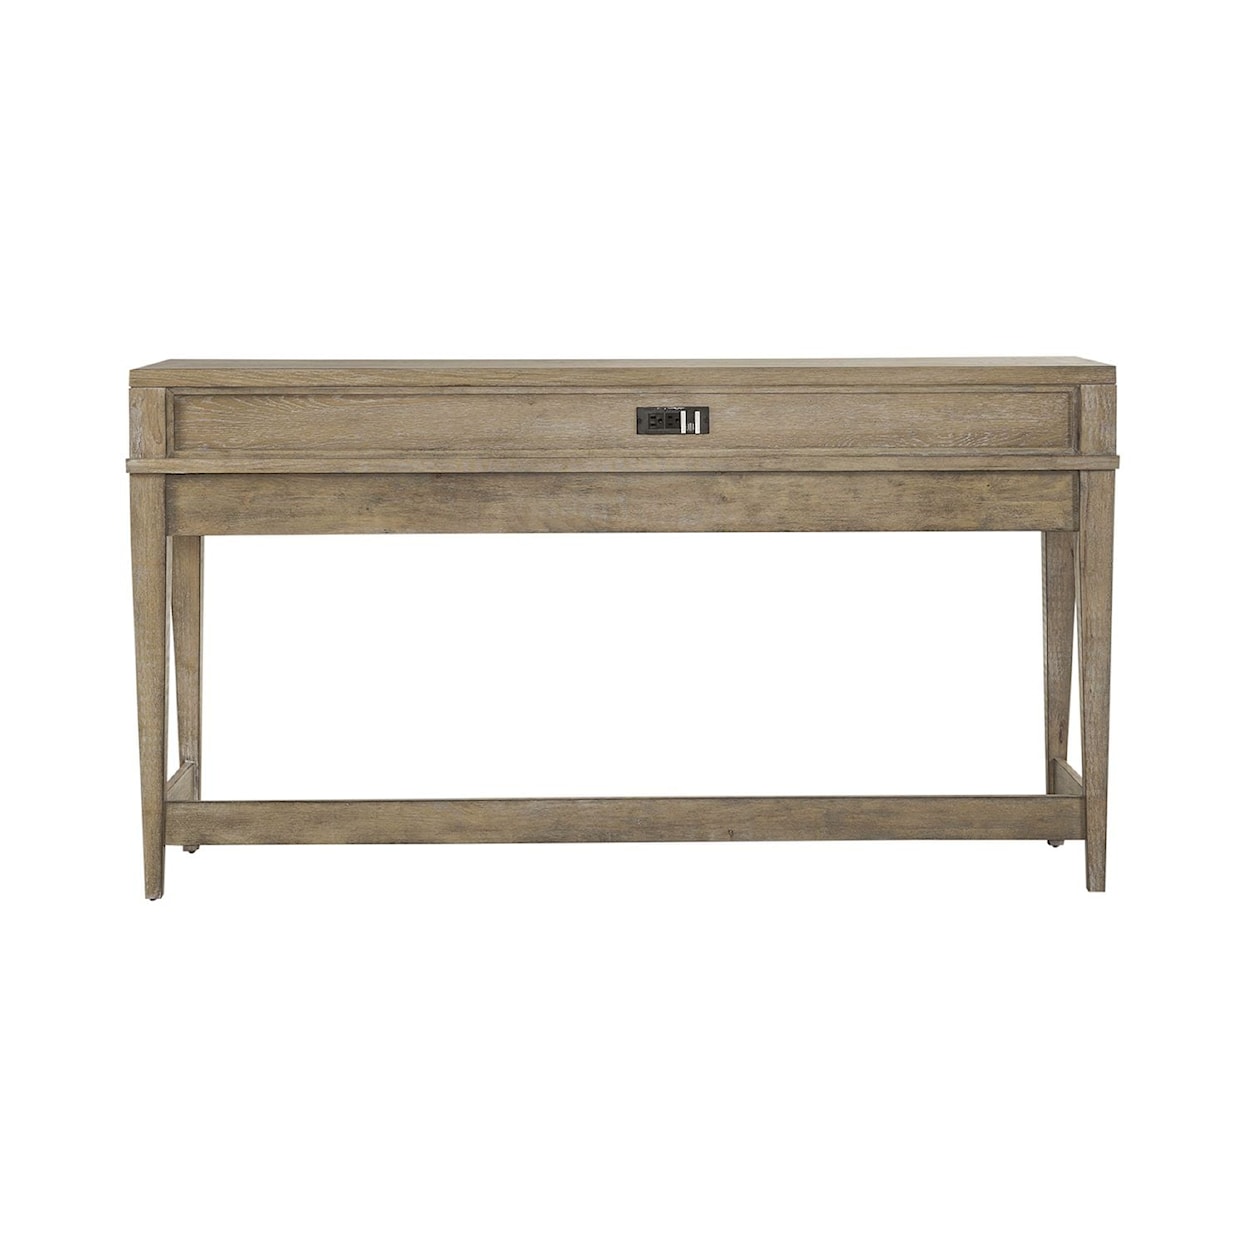 Libby Devonshire Console Bar Table